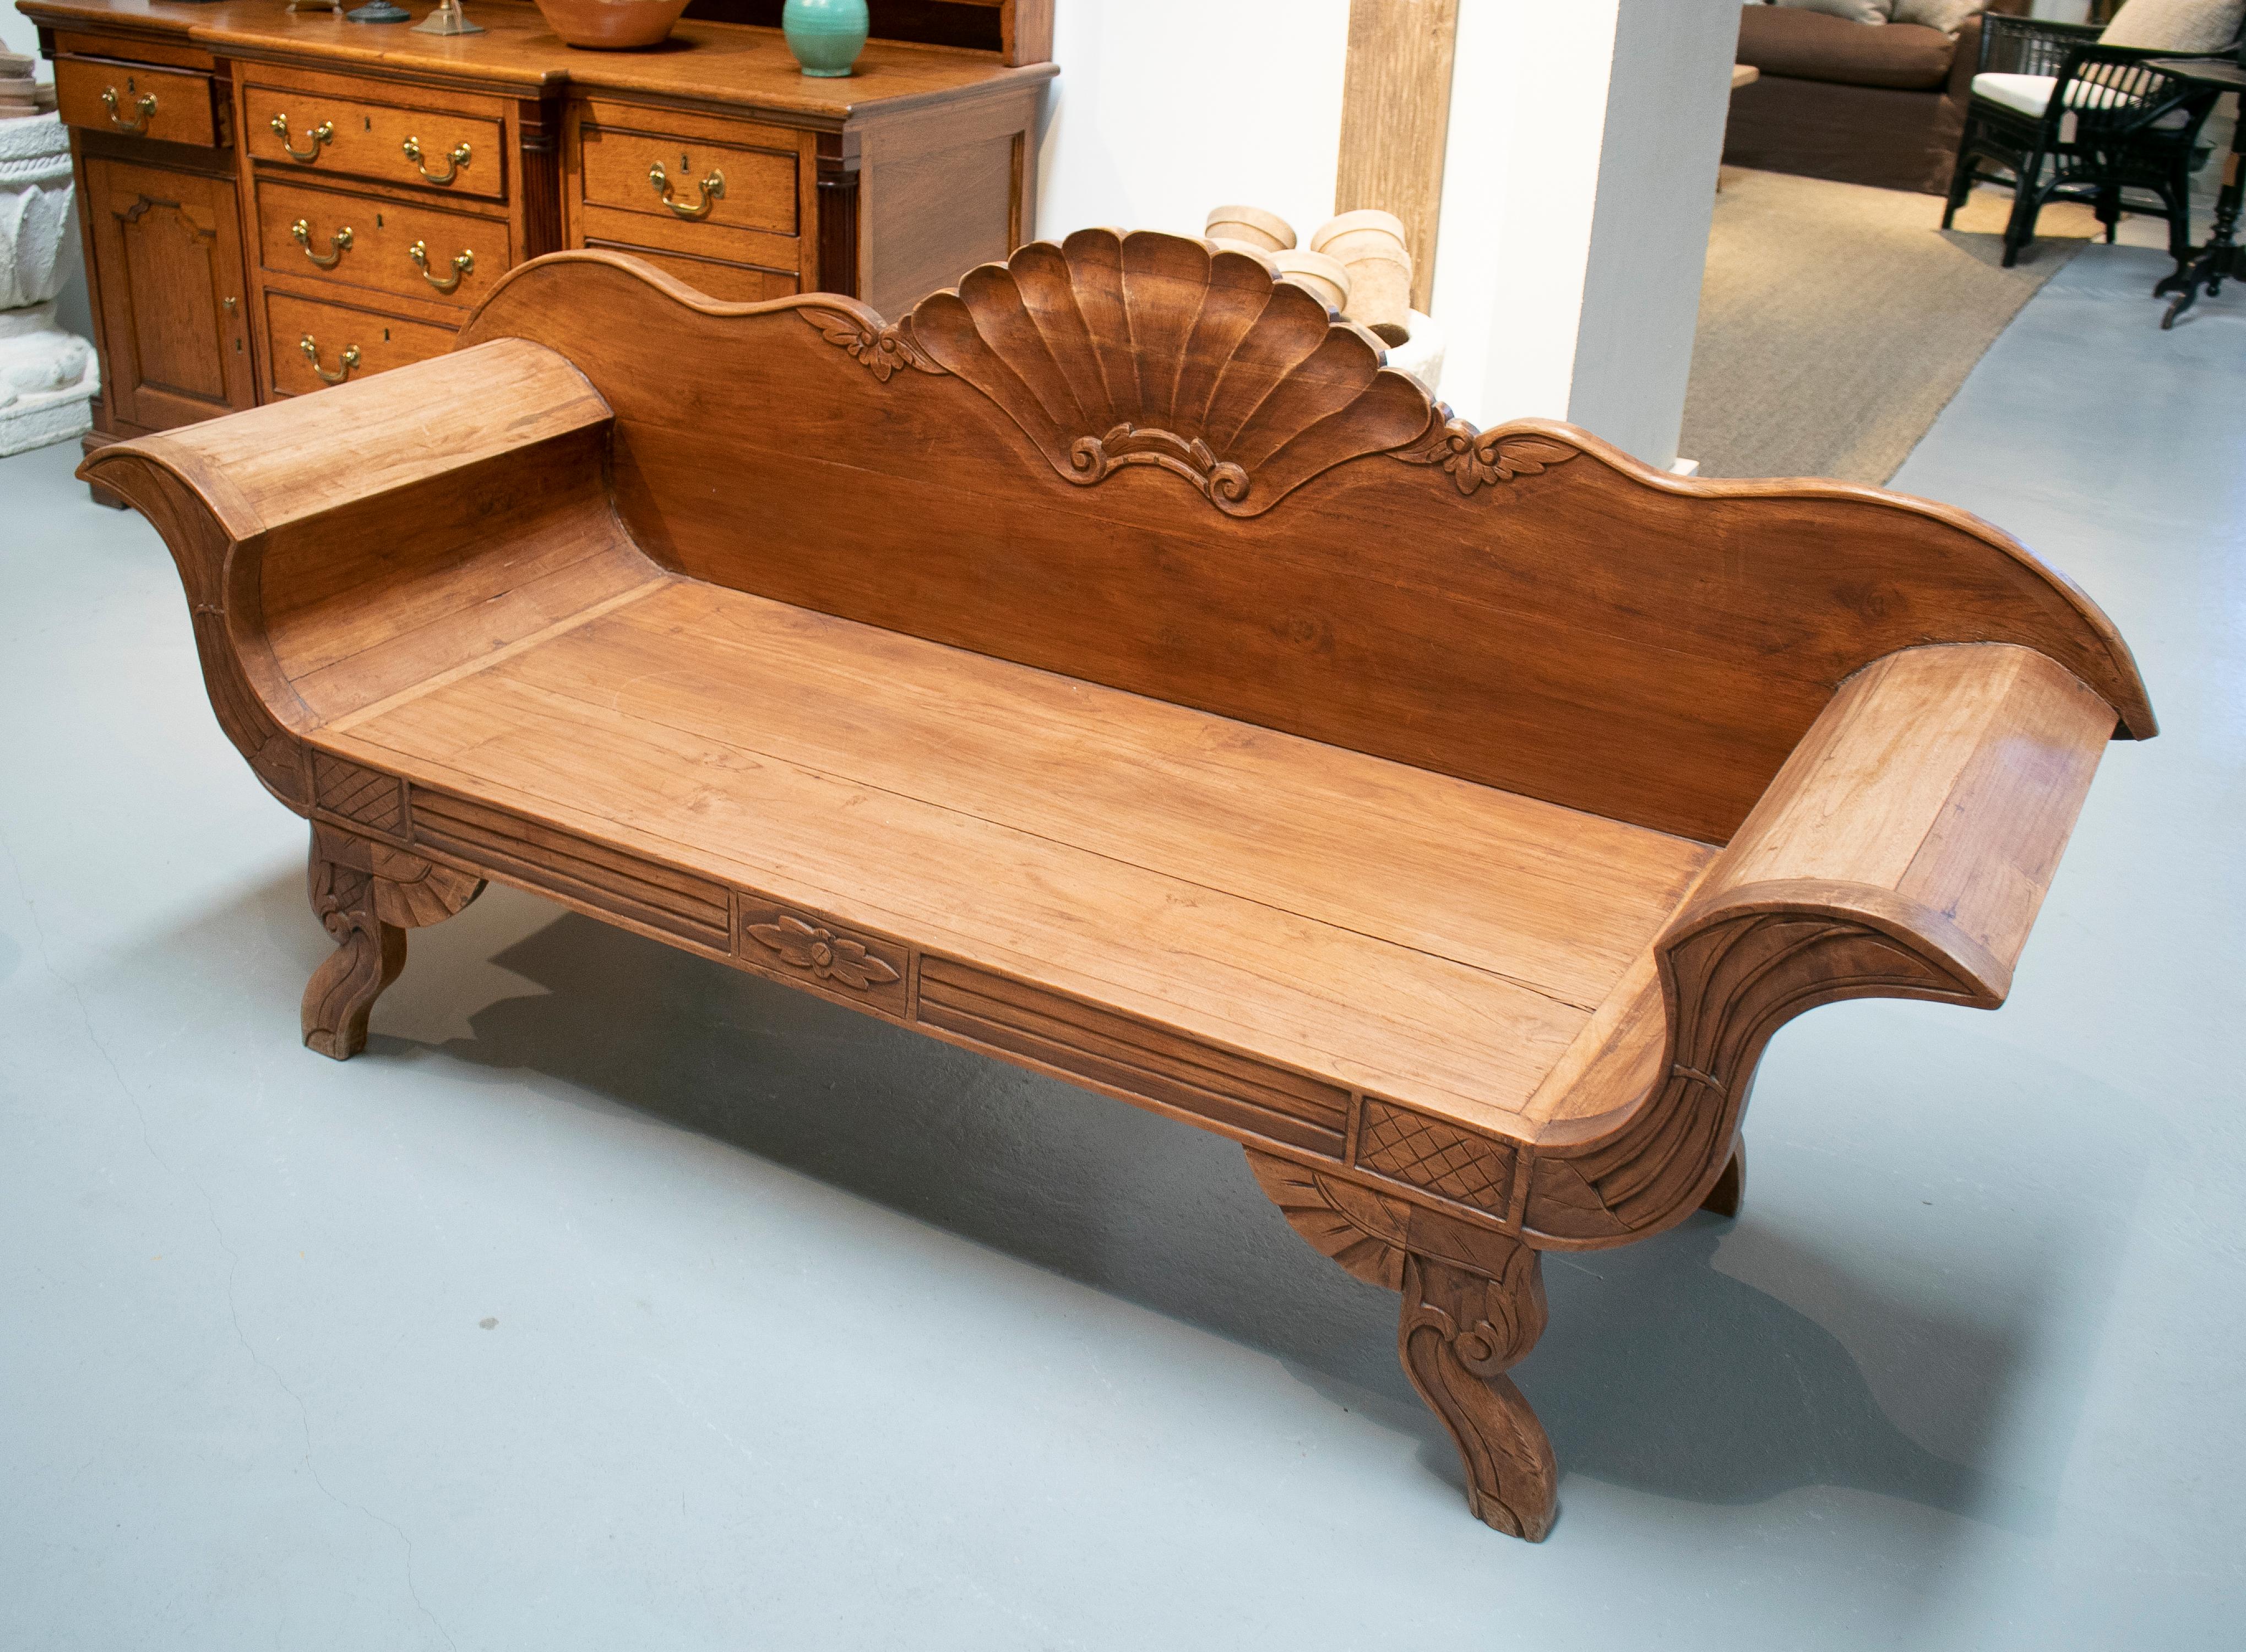 Hand carved wooden garden bench with conch shaped crown decoration and armrests.